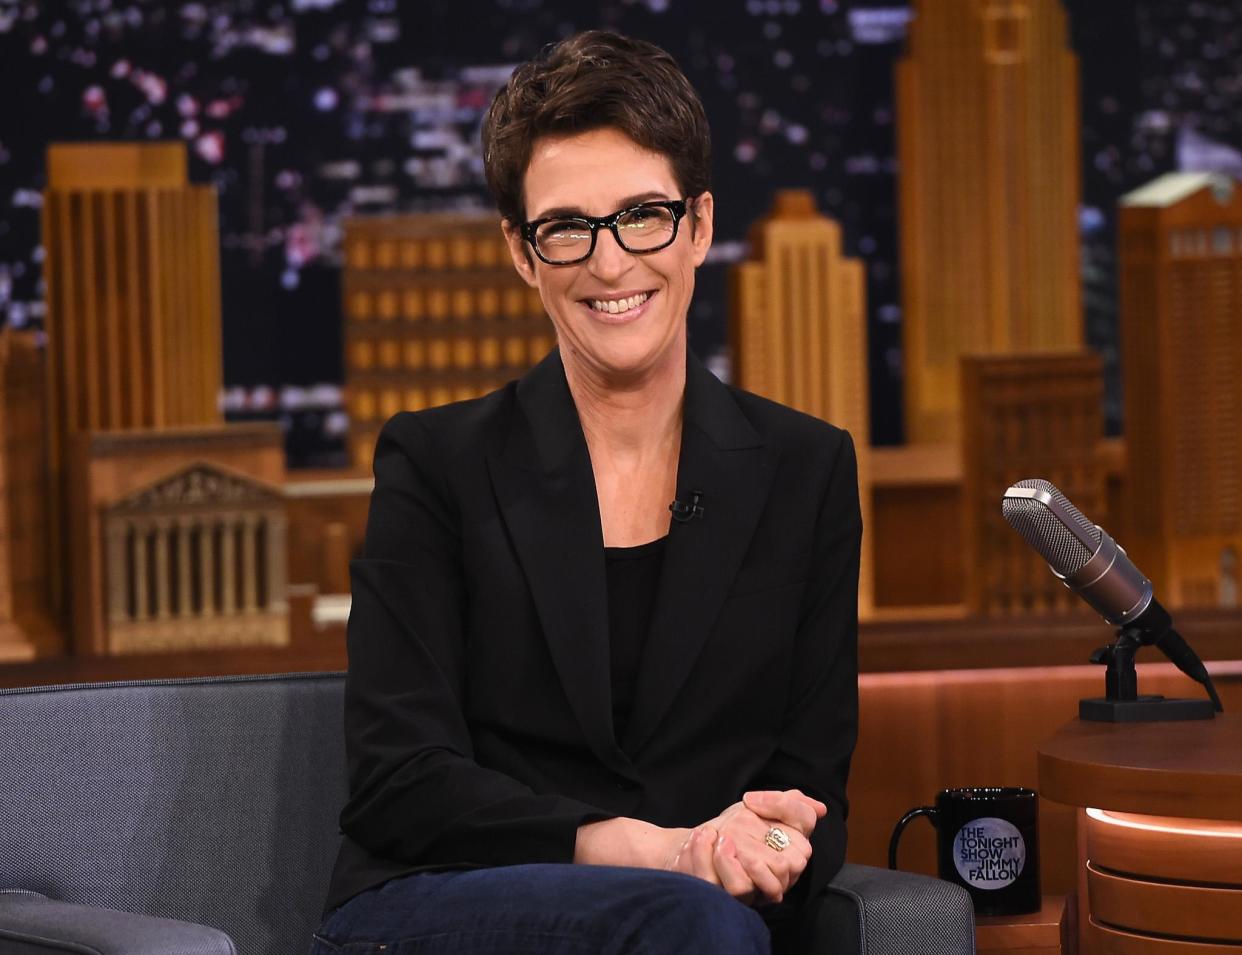 Rachel Maddow Visits "The Tonight Show Starring Jimmy Fallon" at Rockefeller Center: Getty Images for NBC